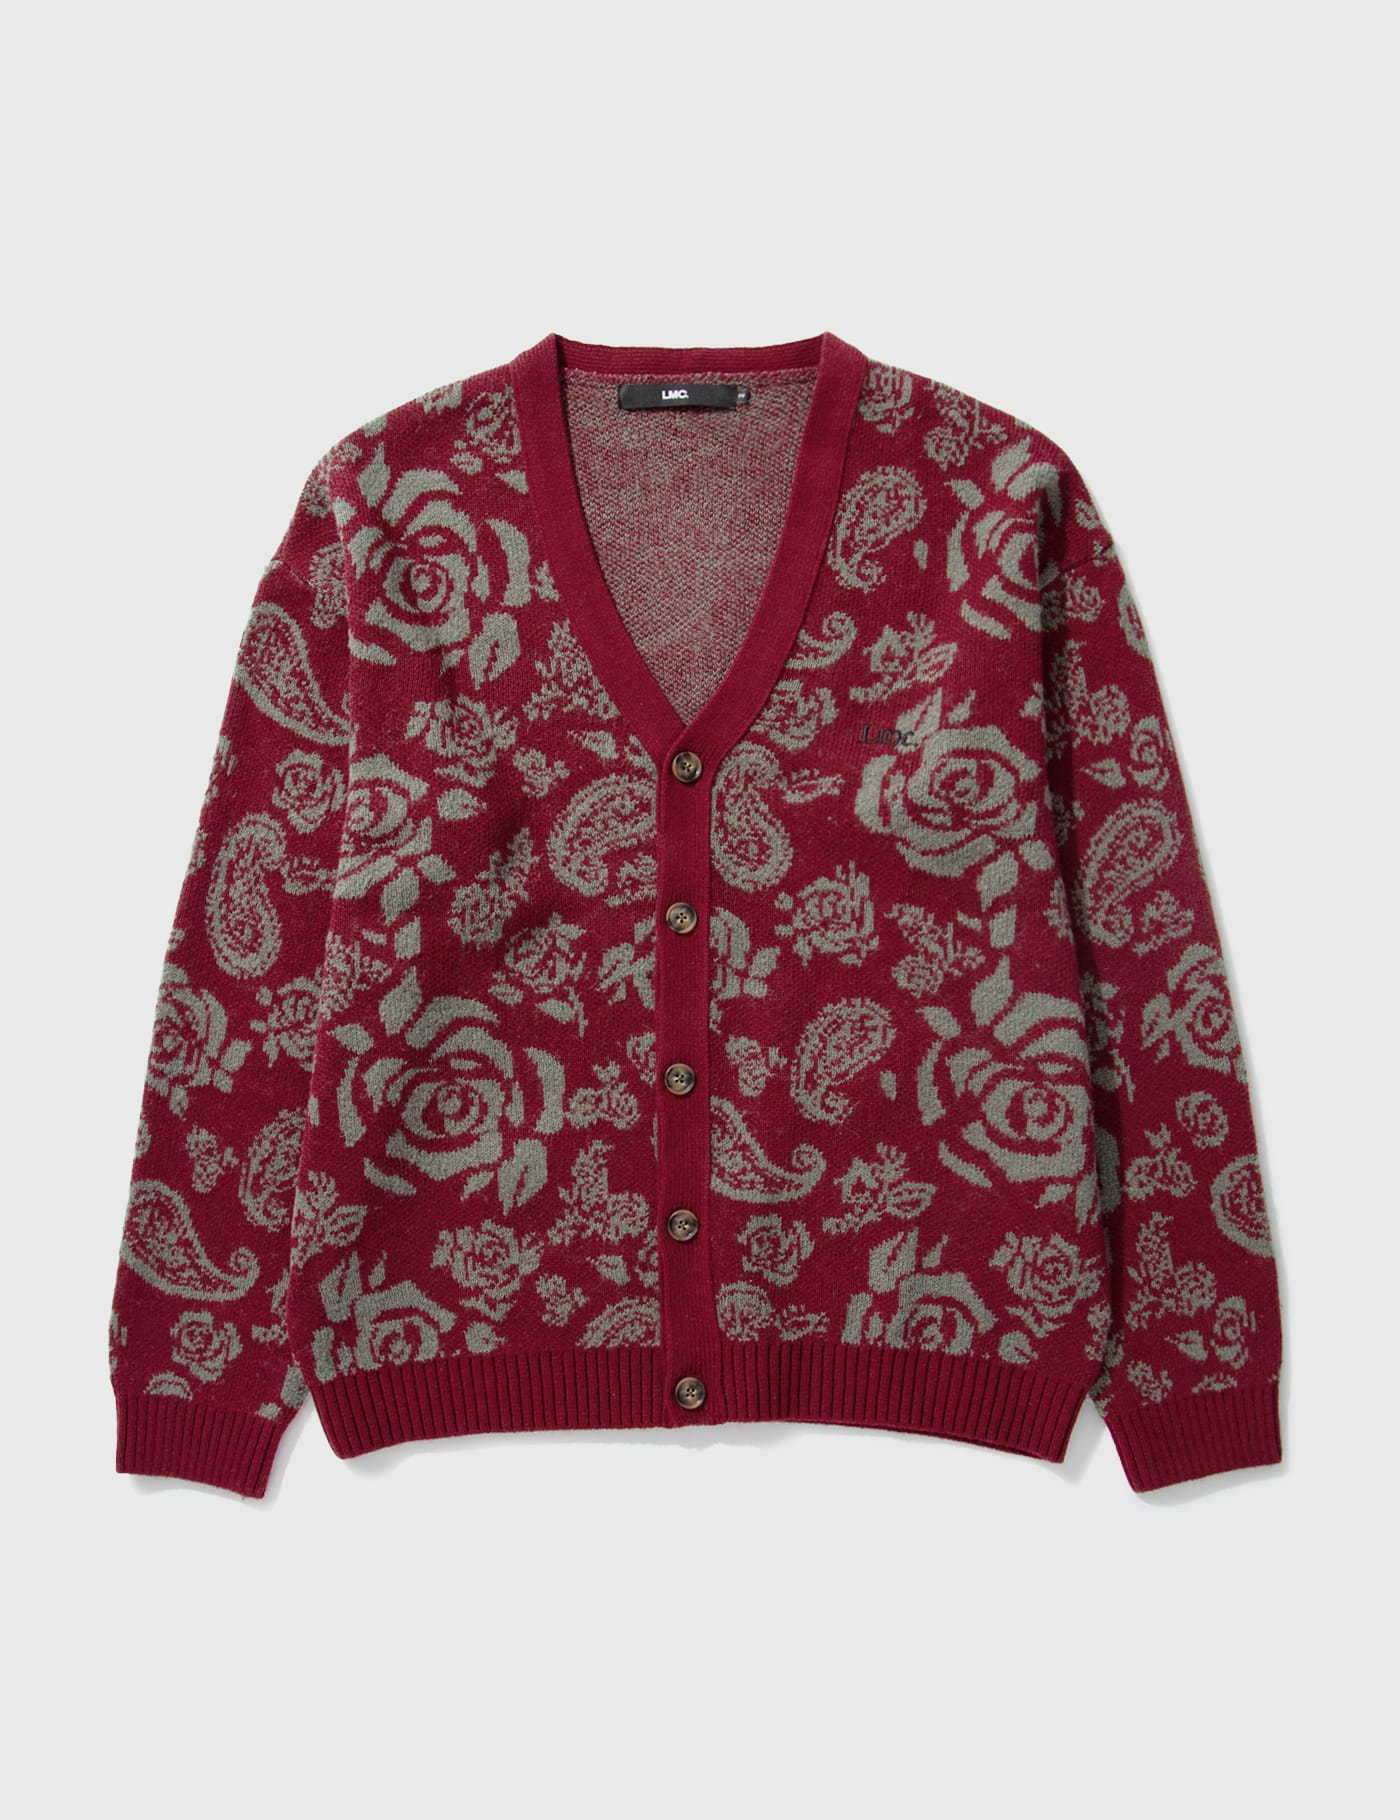 LMC - Rose Paisley Cardigan | HBX - Globally Curated Fashion and